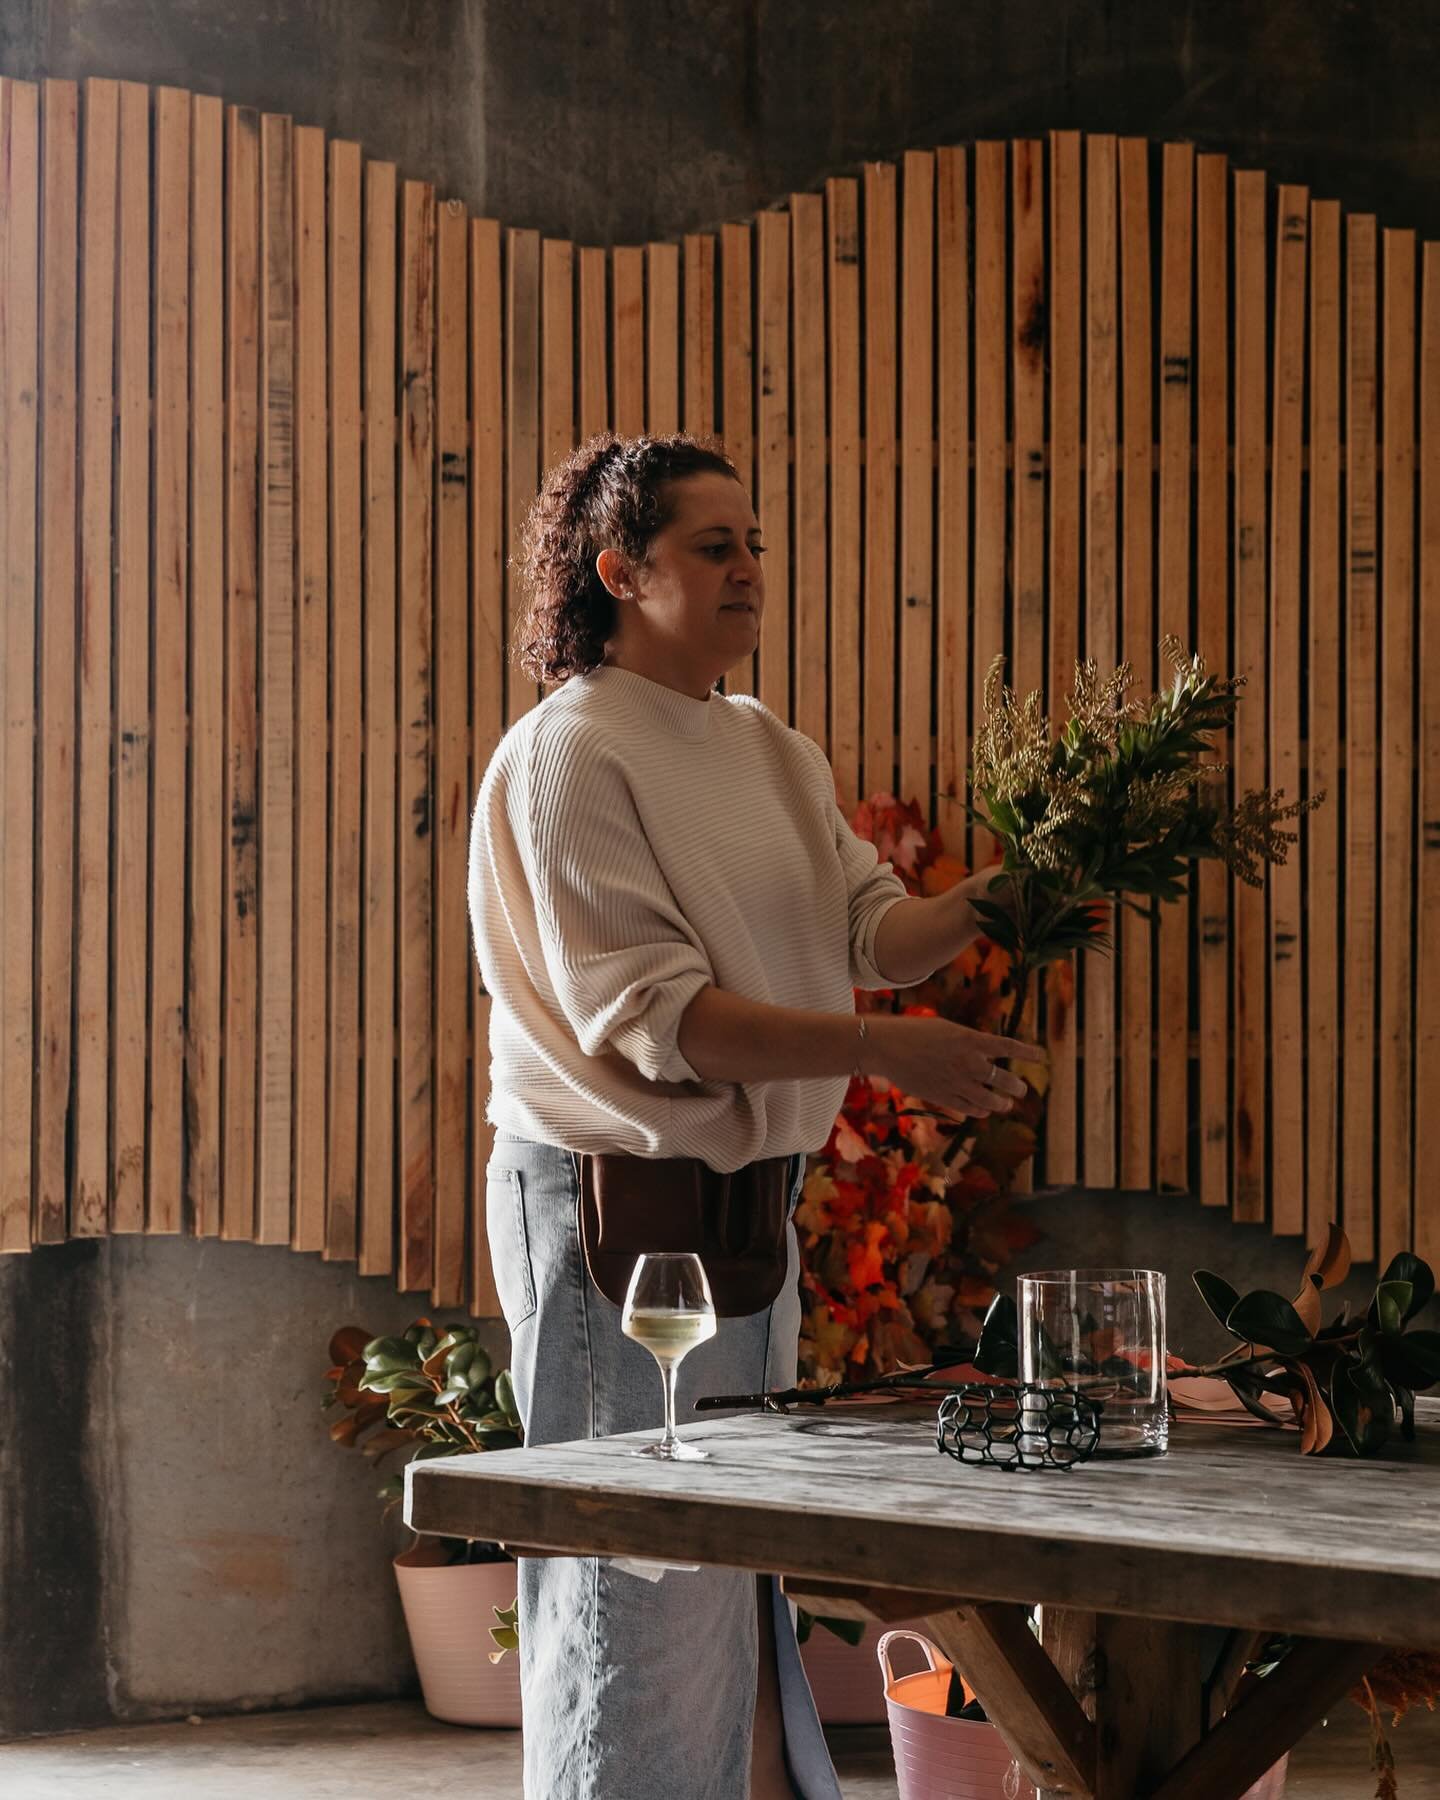 Who doesn&rsquo;t love Pinot and posies?! Last weekends collab with @peninsulaposyproject was a delight! Thanks everyone for coming down, will be sure to do this again. And how spectacular does the barrel room look all fancy 🌸🍂🍷

Keep an eye on so